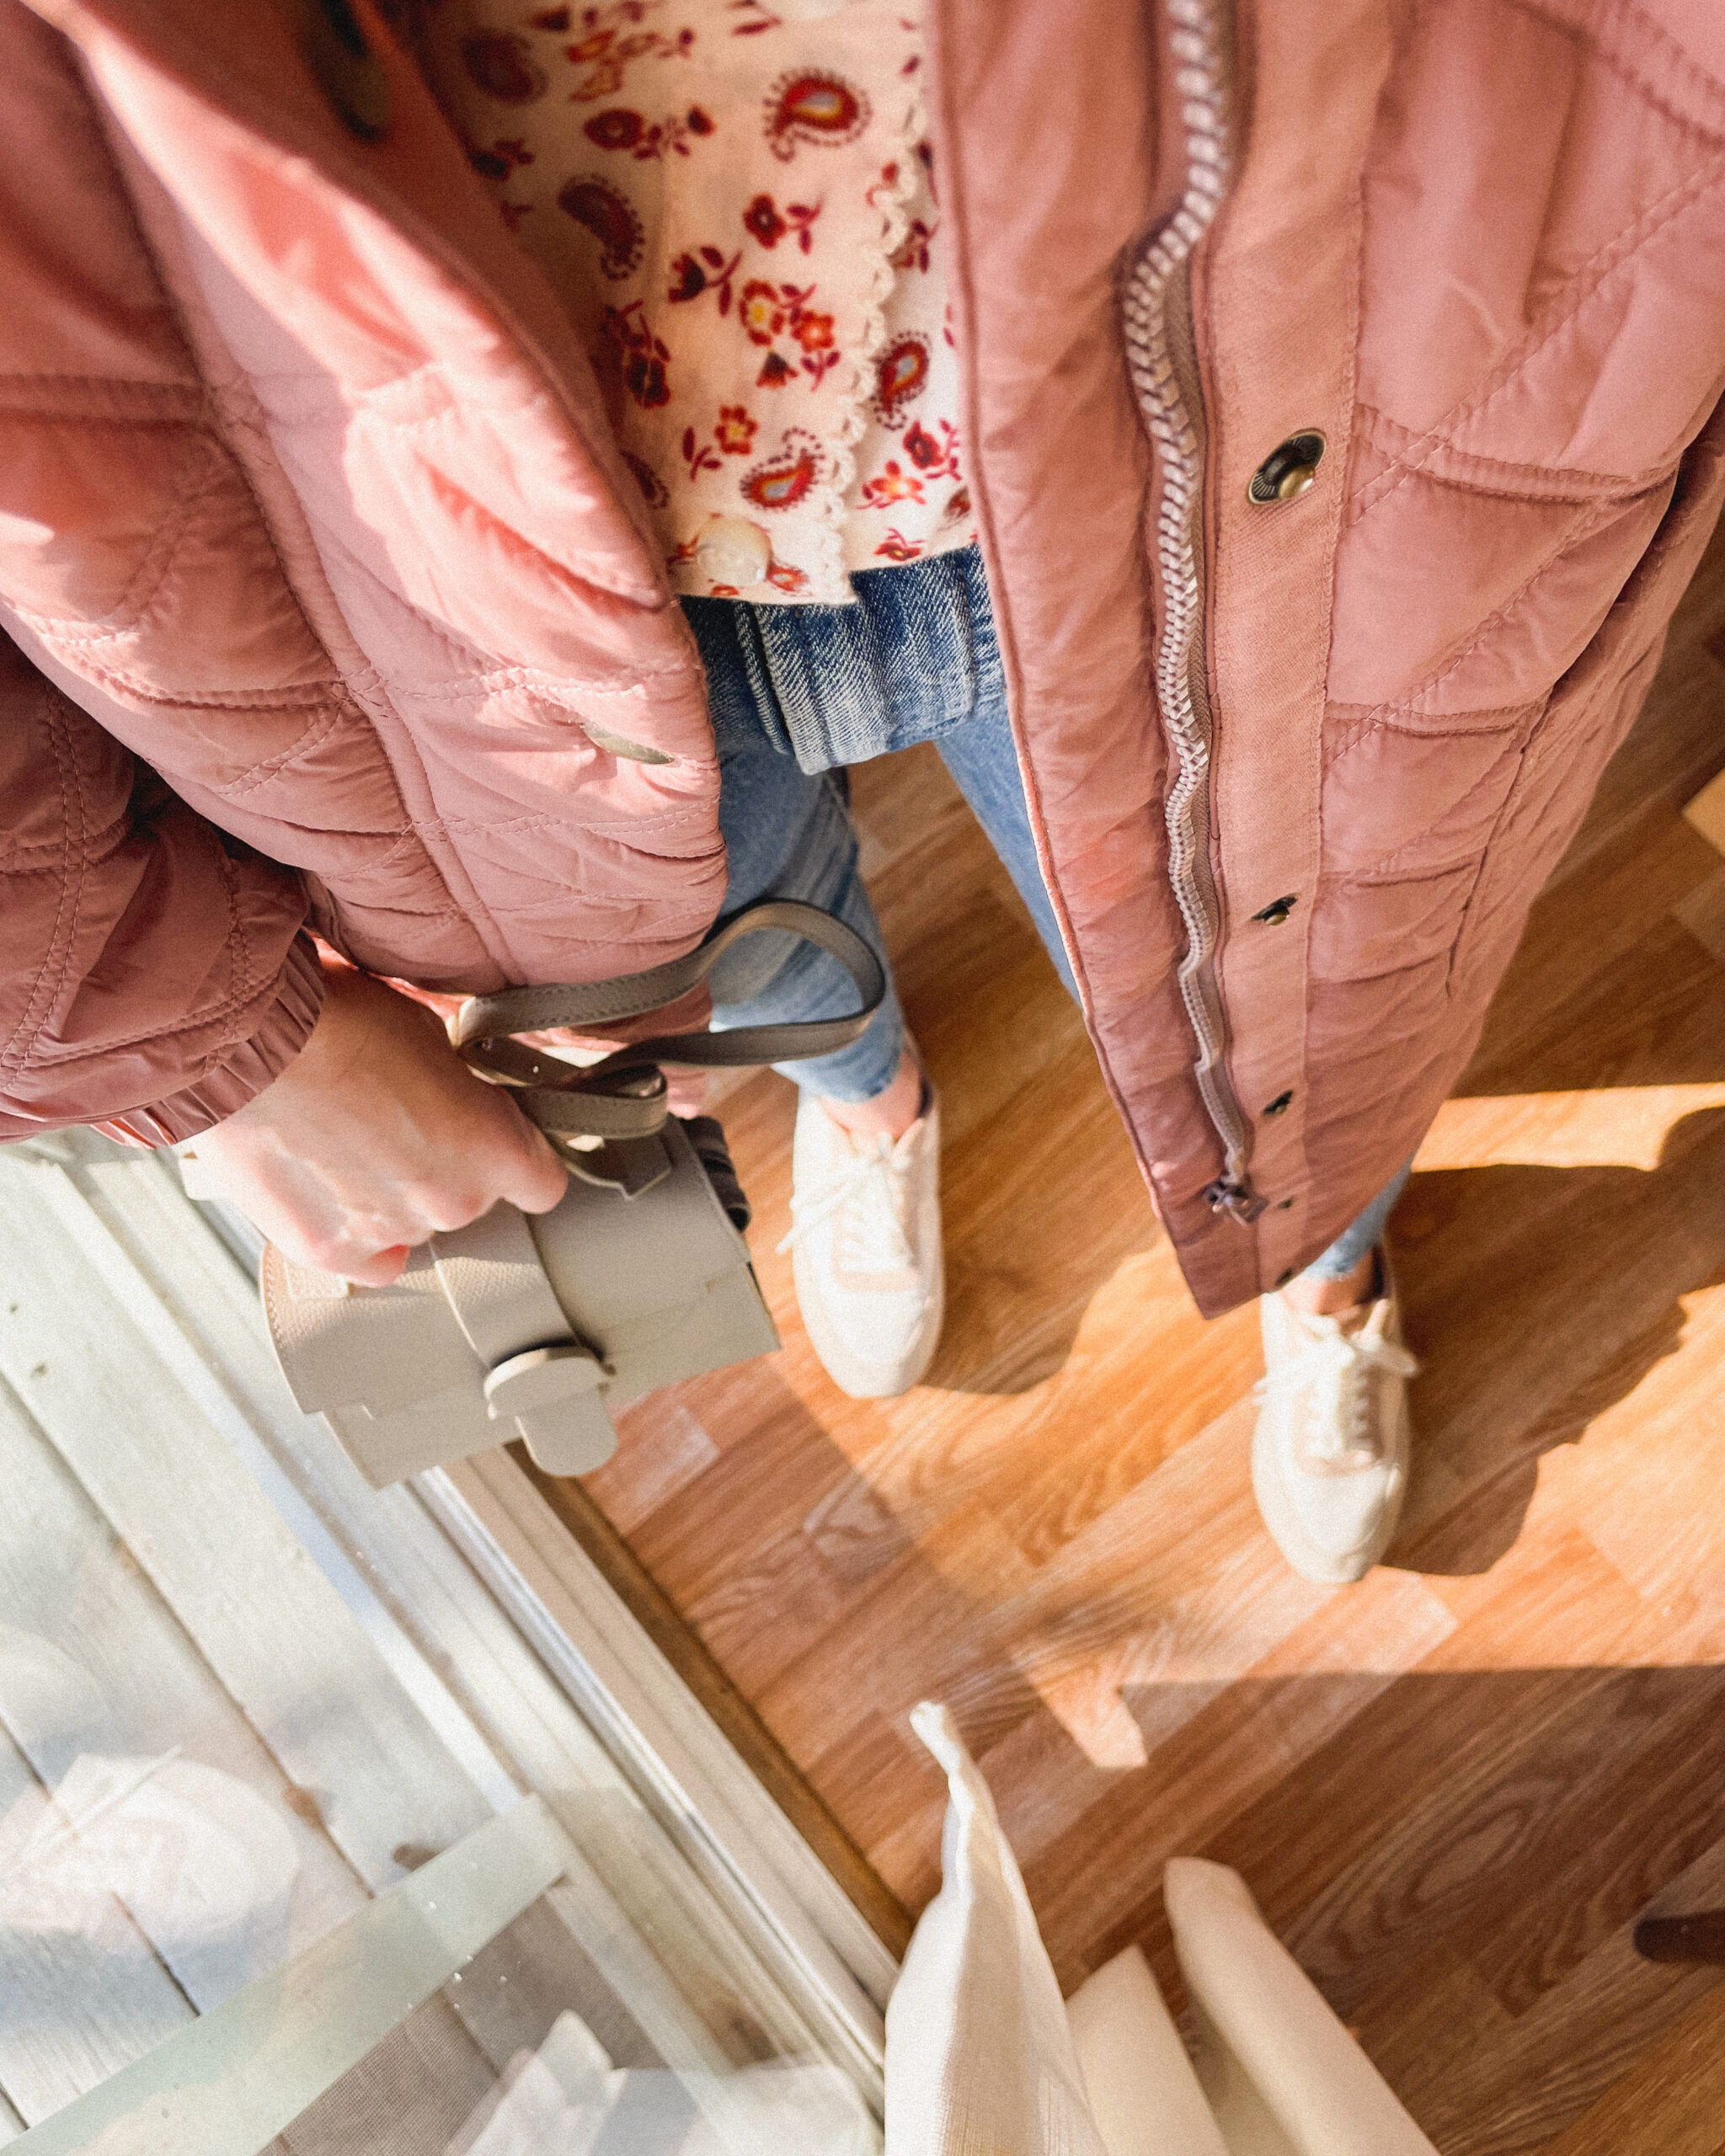 Karin Emily wears a pink quilted coat, pink floral top from Doen, Madewell perfect vintage jeans, and pink sneakers